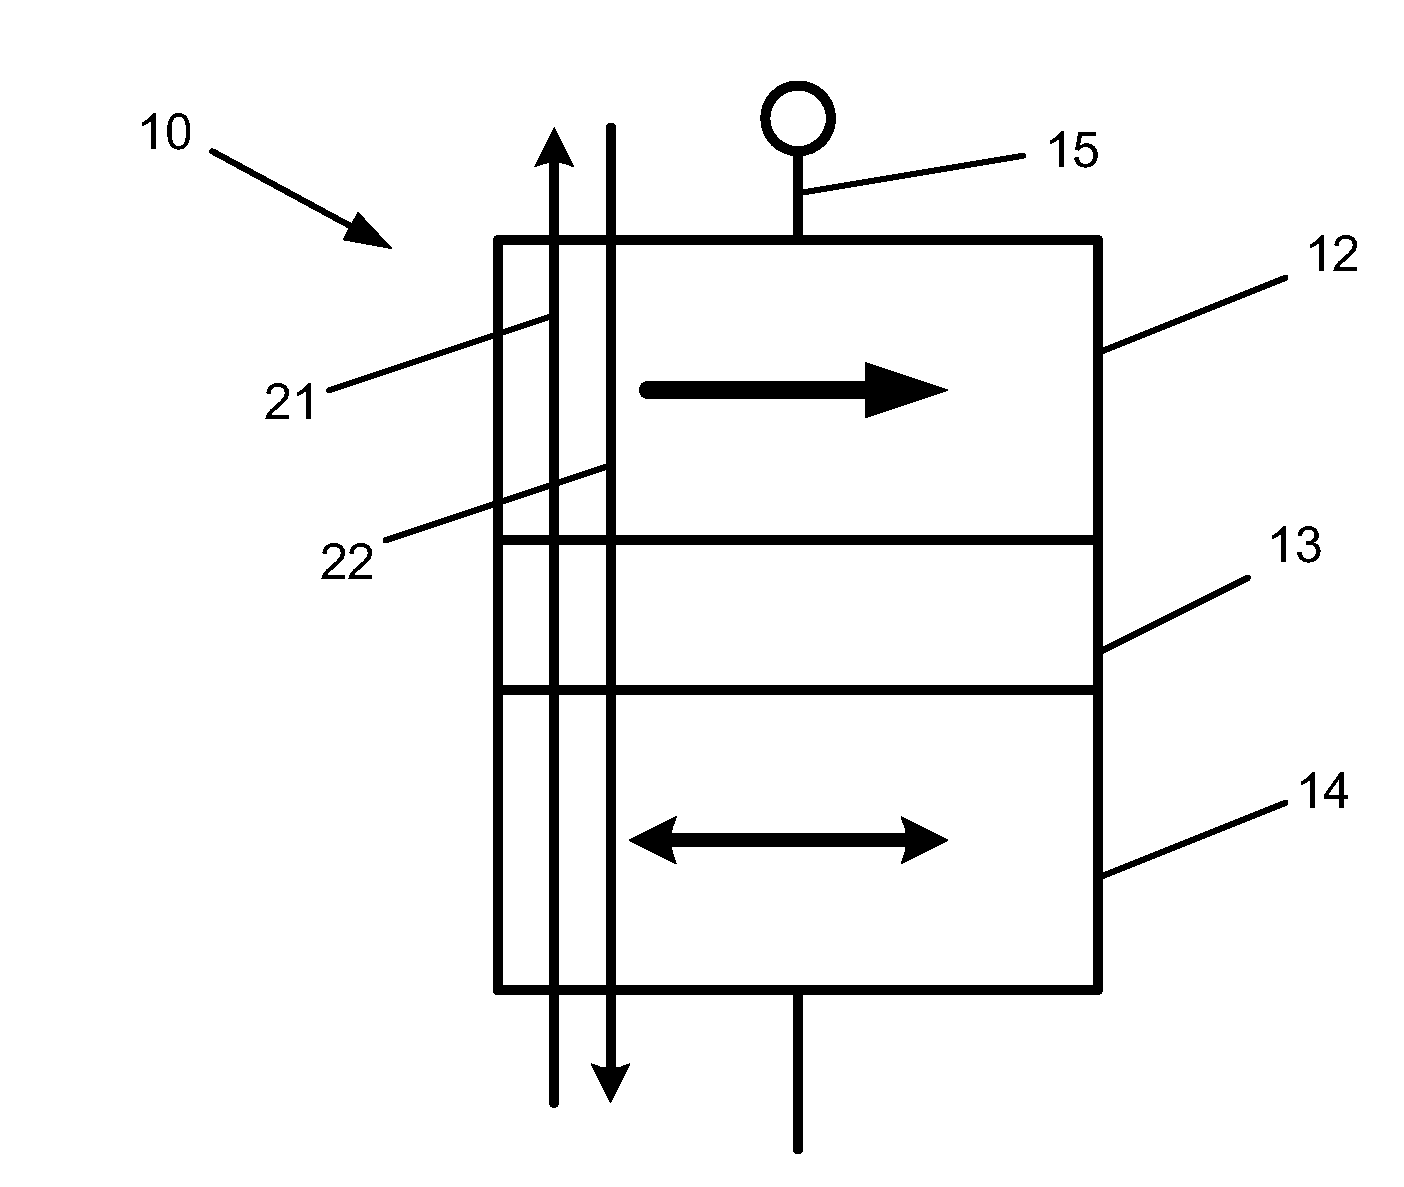 Reconfigurable magnetic logic device using spin torque